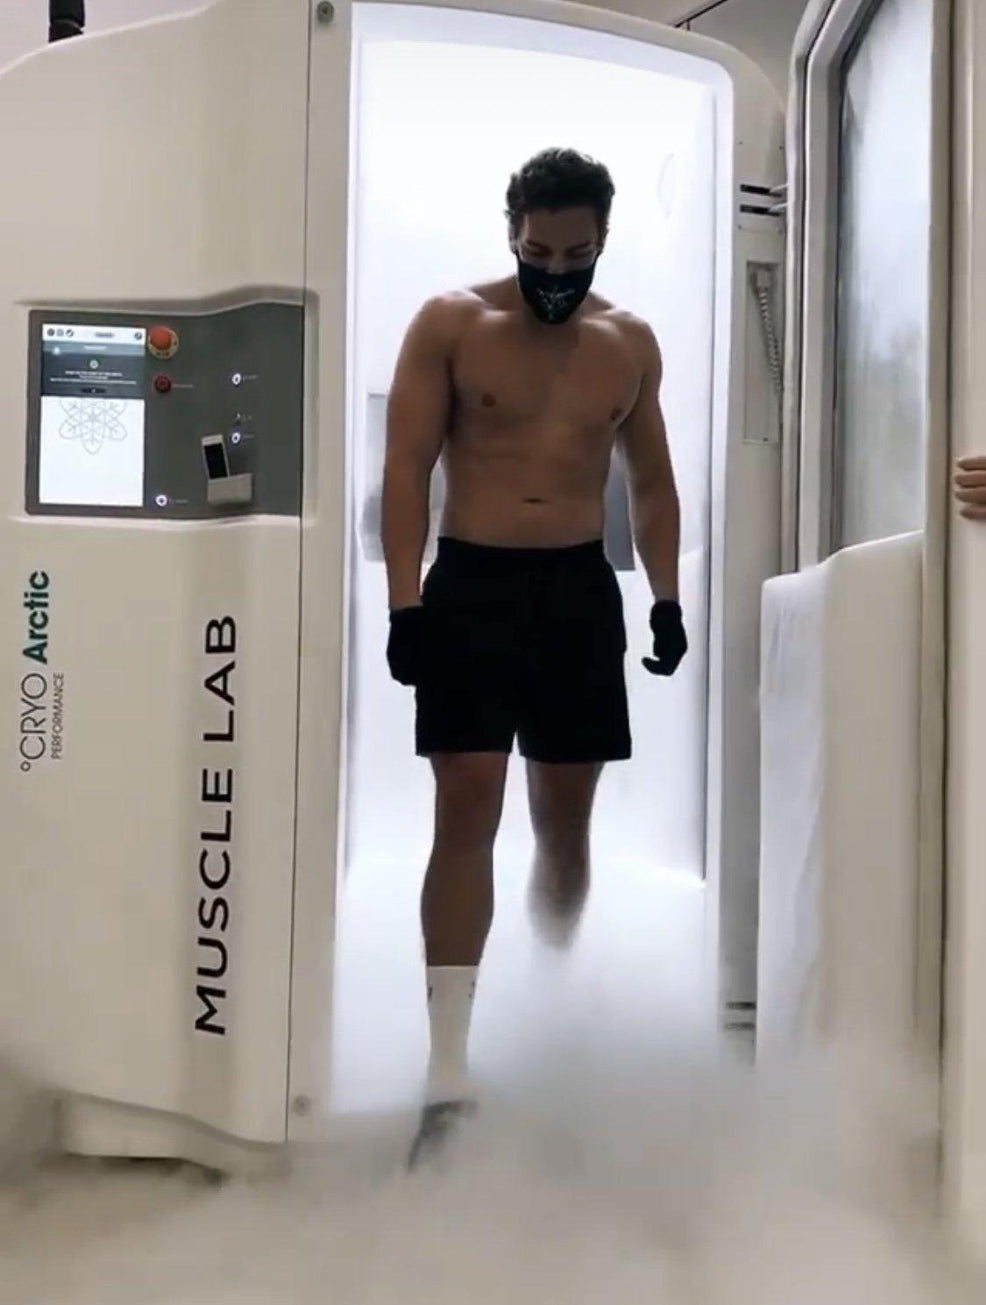 How to Maximize Your Whole Body Cryotherapy Session